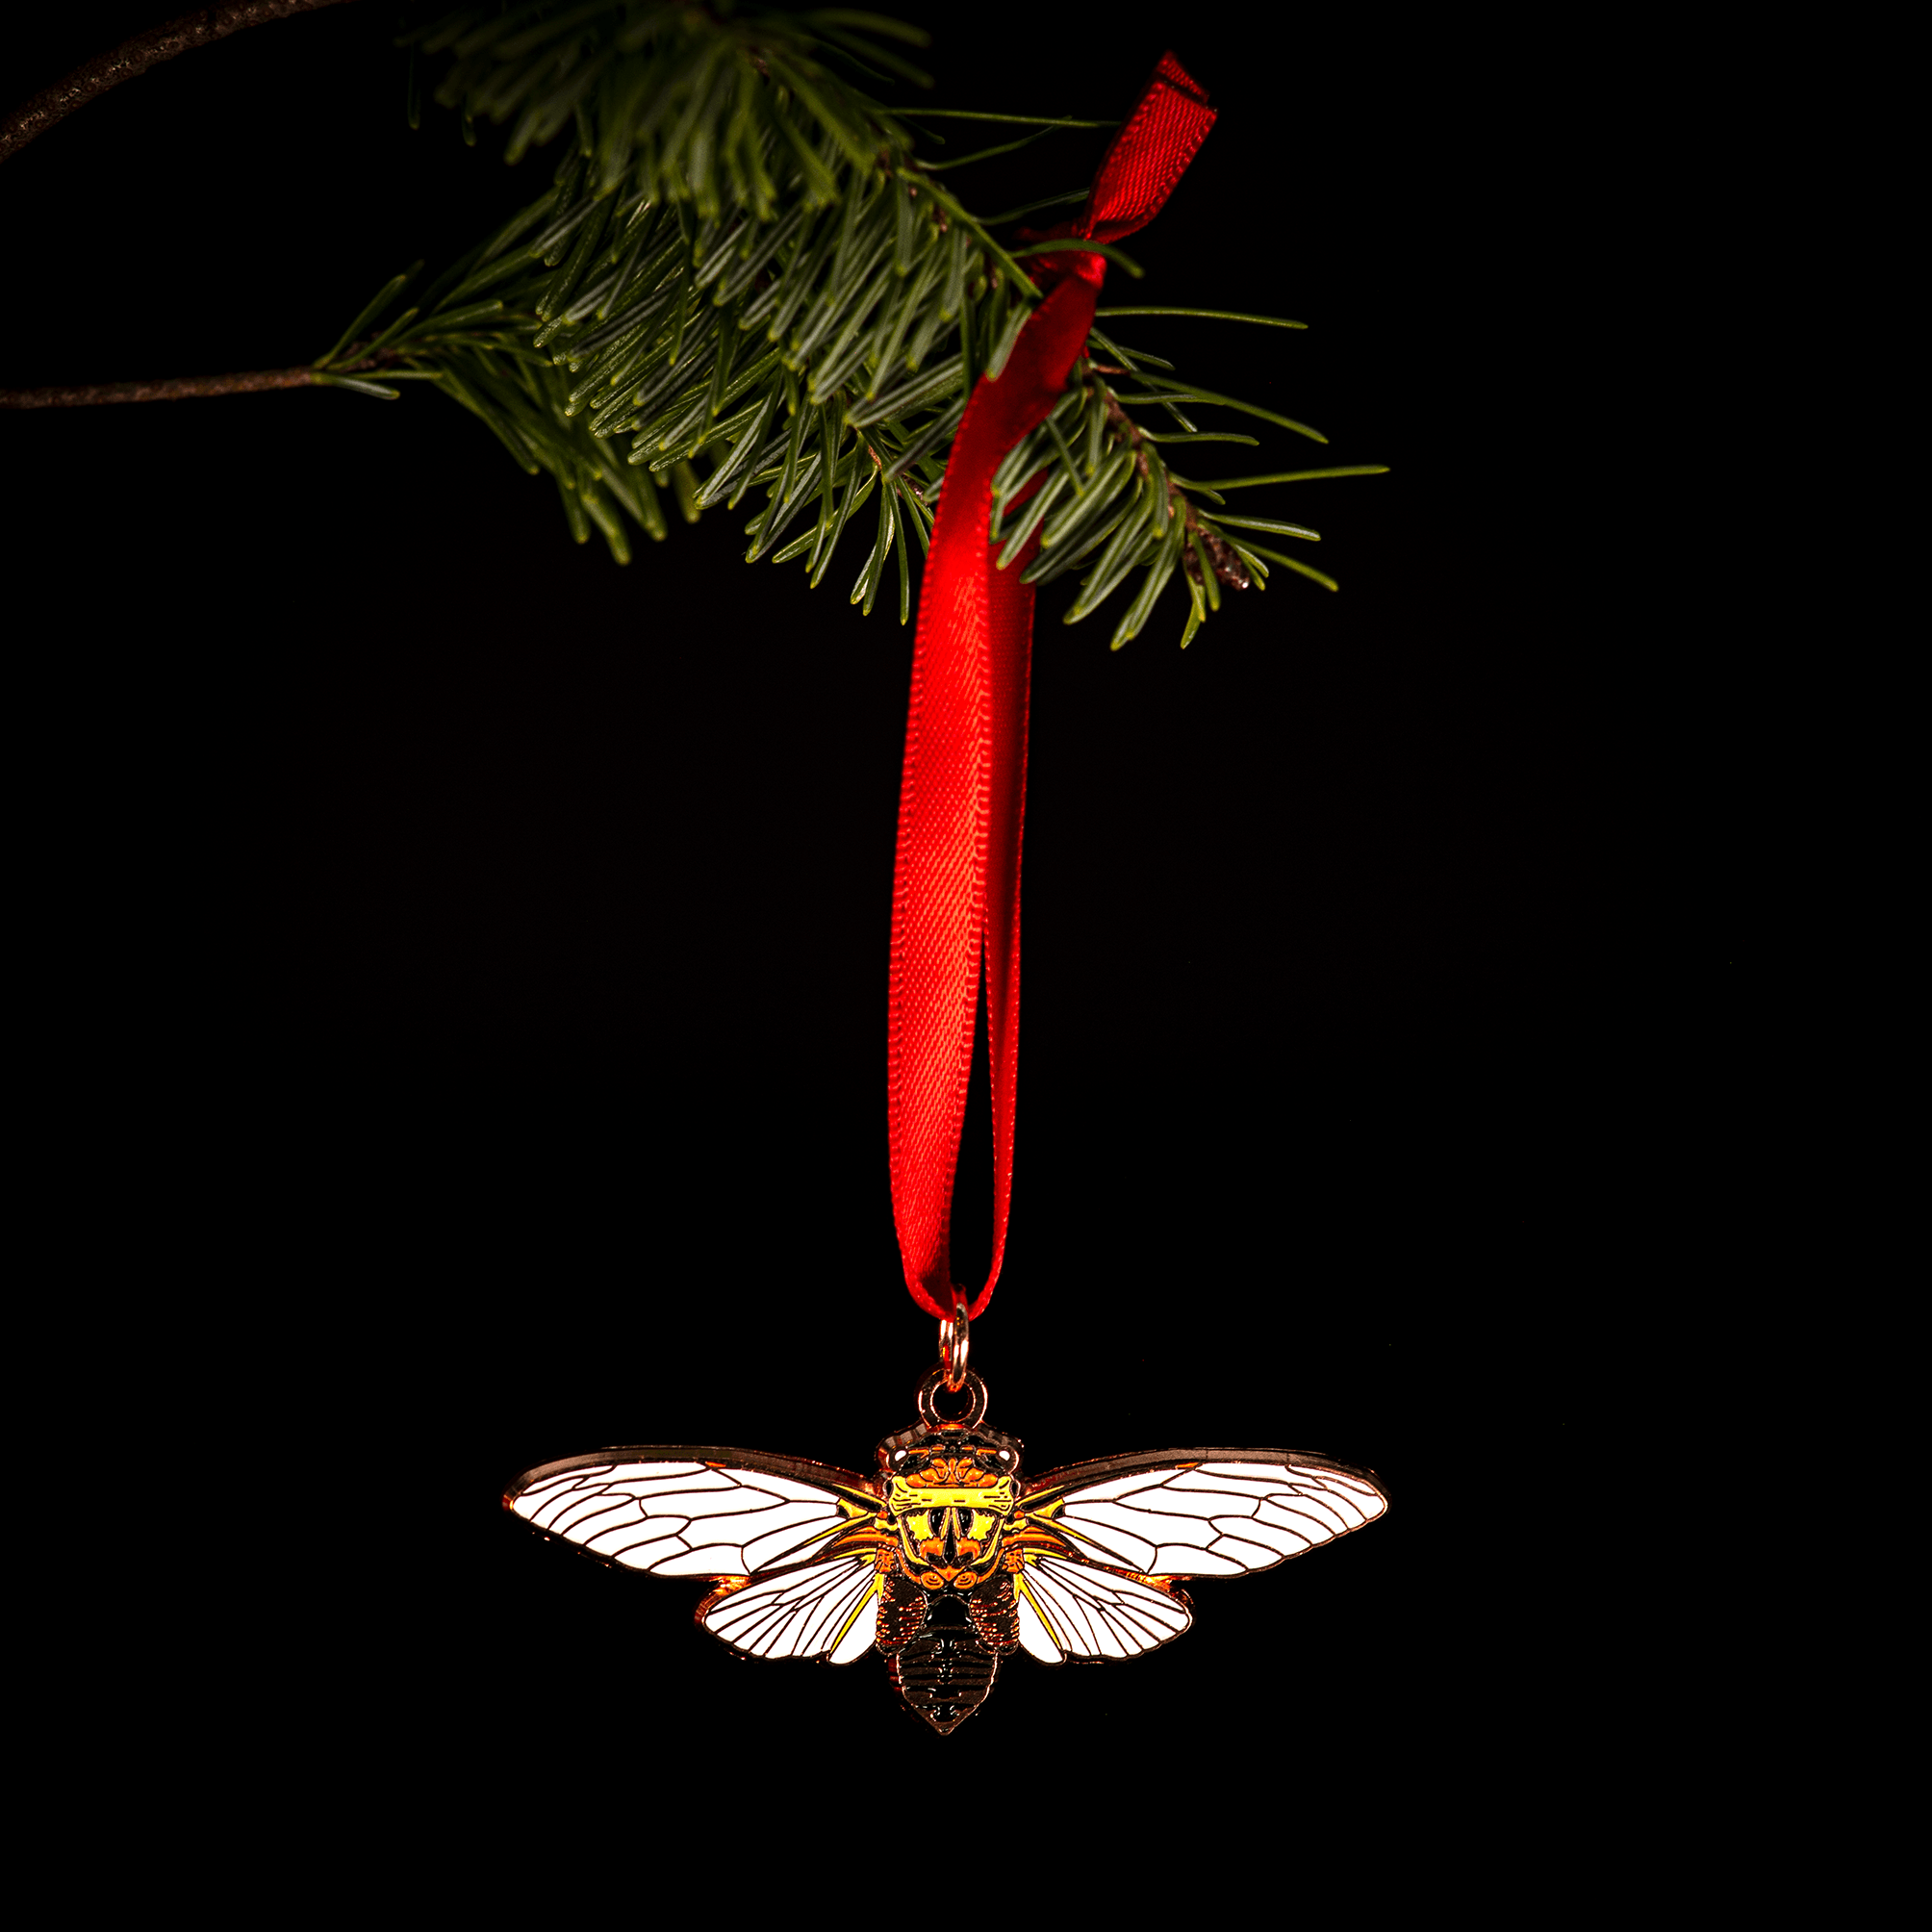 Double Drummer Cicada Ornament by The Roving House